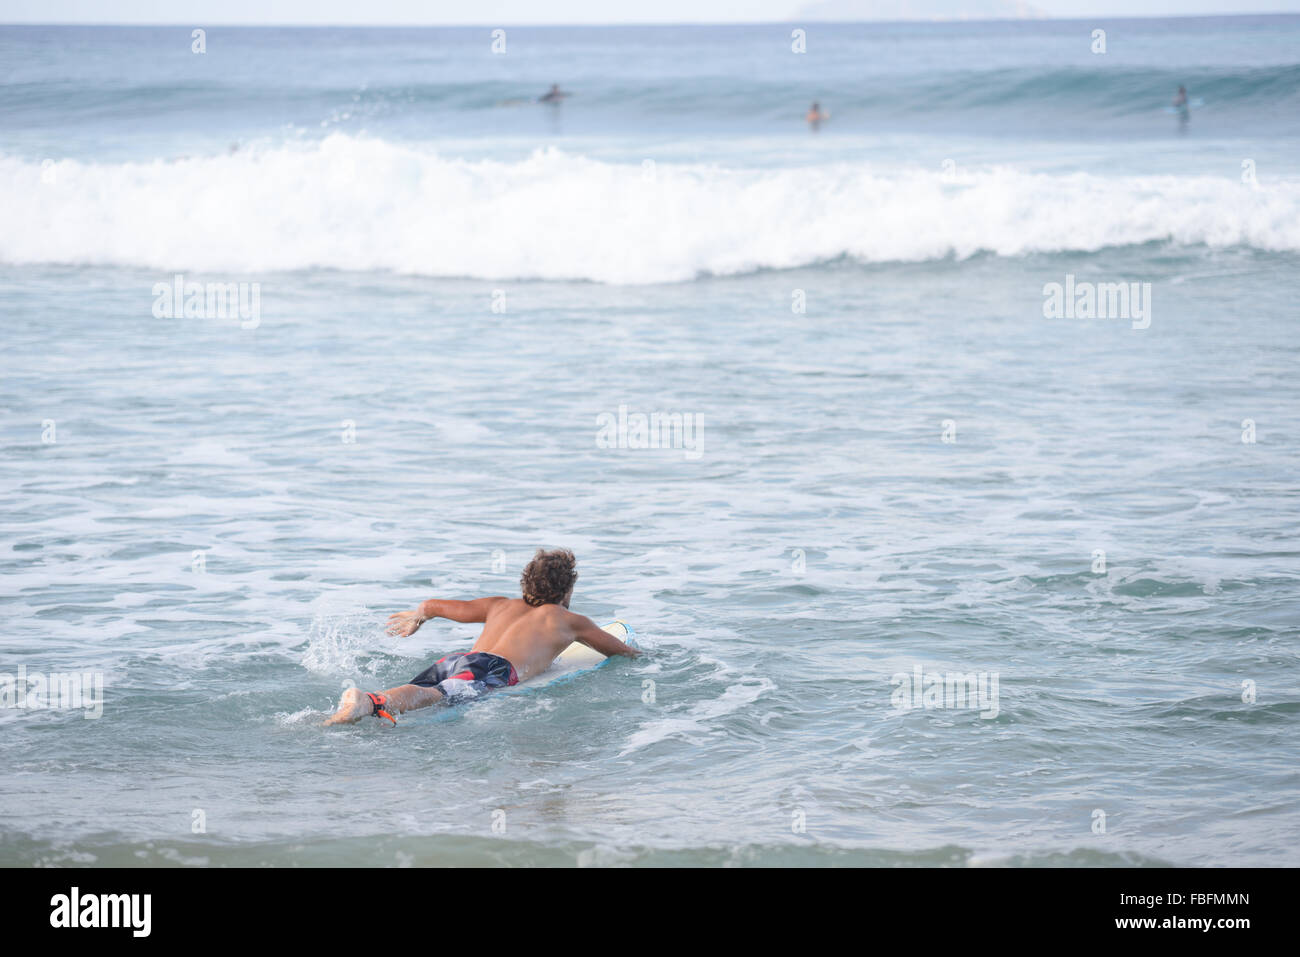 Male surfer surfing towards waves at Dome's Beach. Rincon, Puert Rico. USA territory. Caribbean Island. Stock Photo